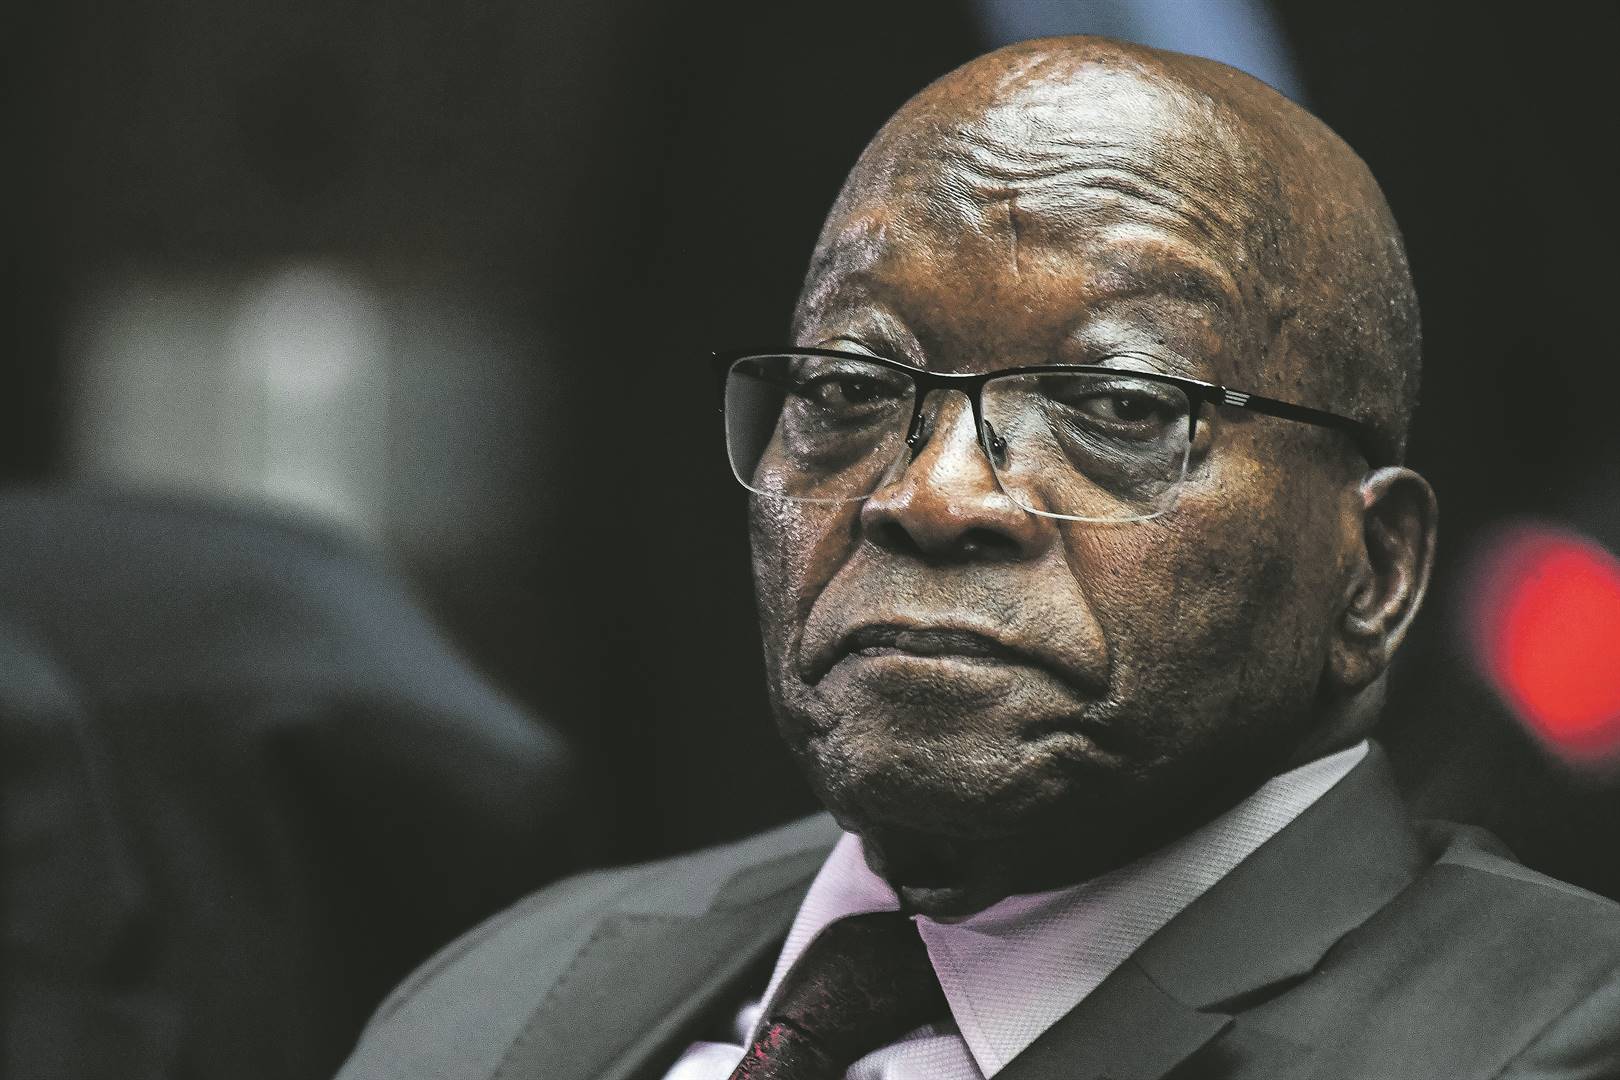 Former president Jacob Zuma's track record should have prevented him from standing for Parliament, argues the writer. (Darren Stewart/Gallo images)